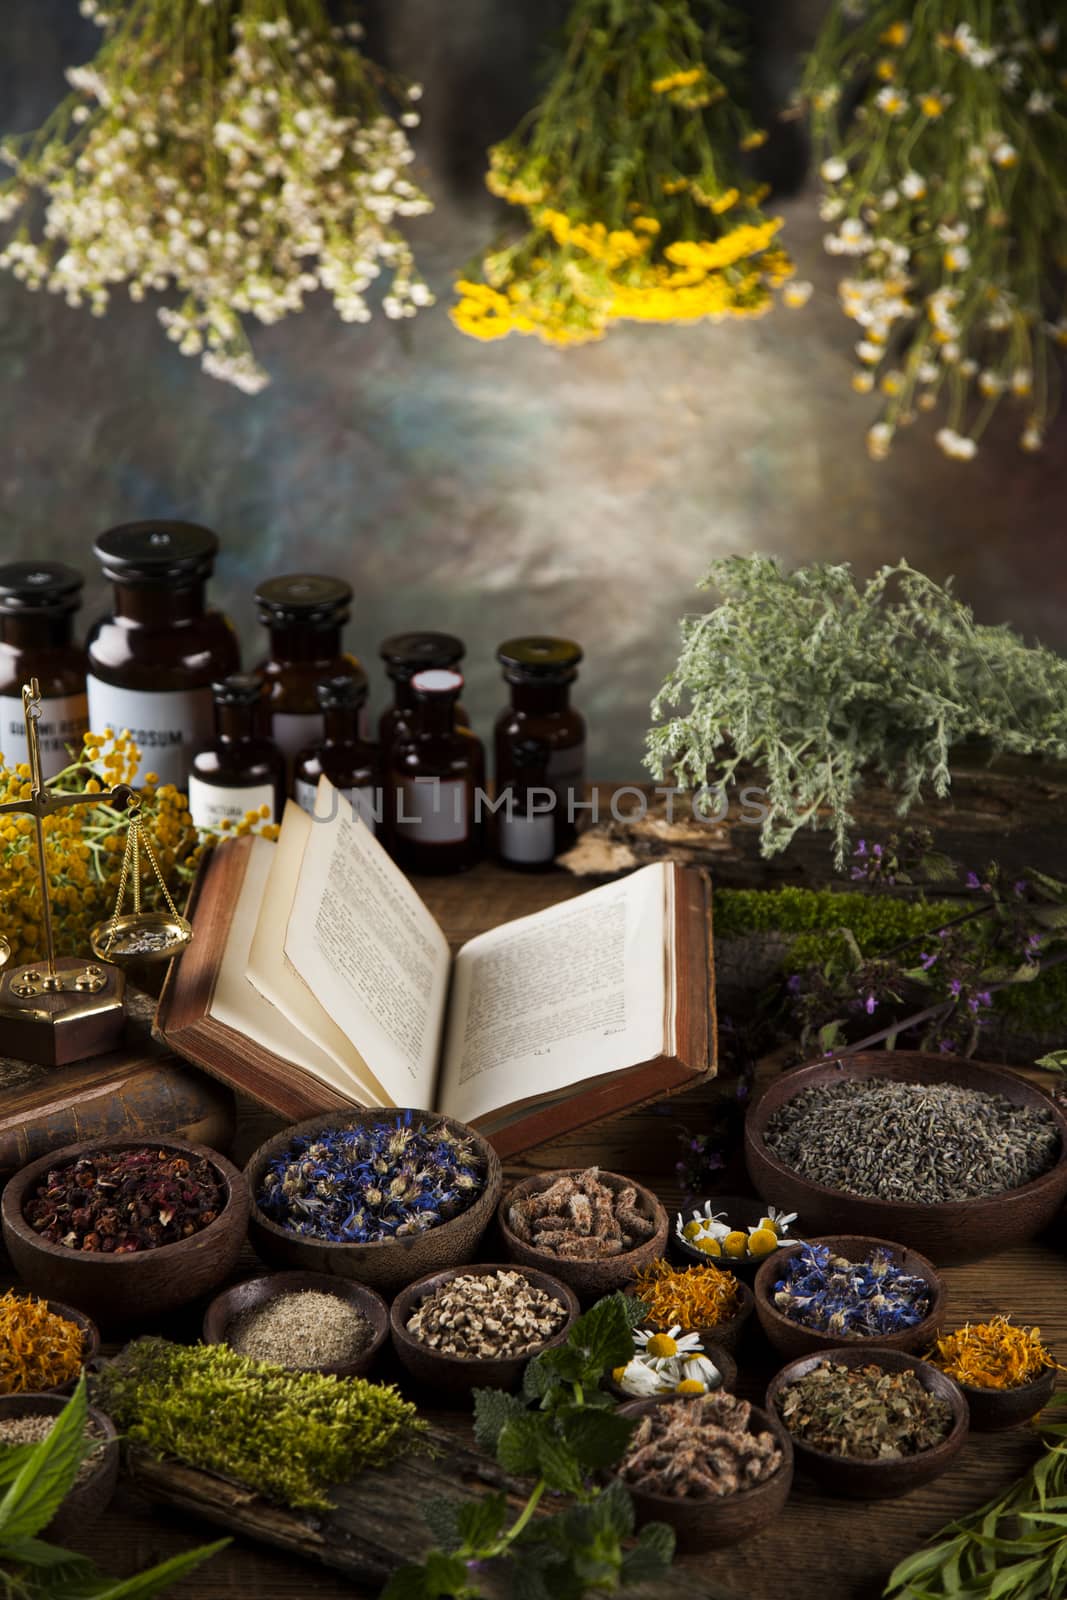 Book and Herbal medicine on wooden table background by JanPietruszka